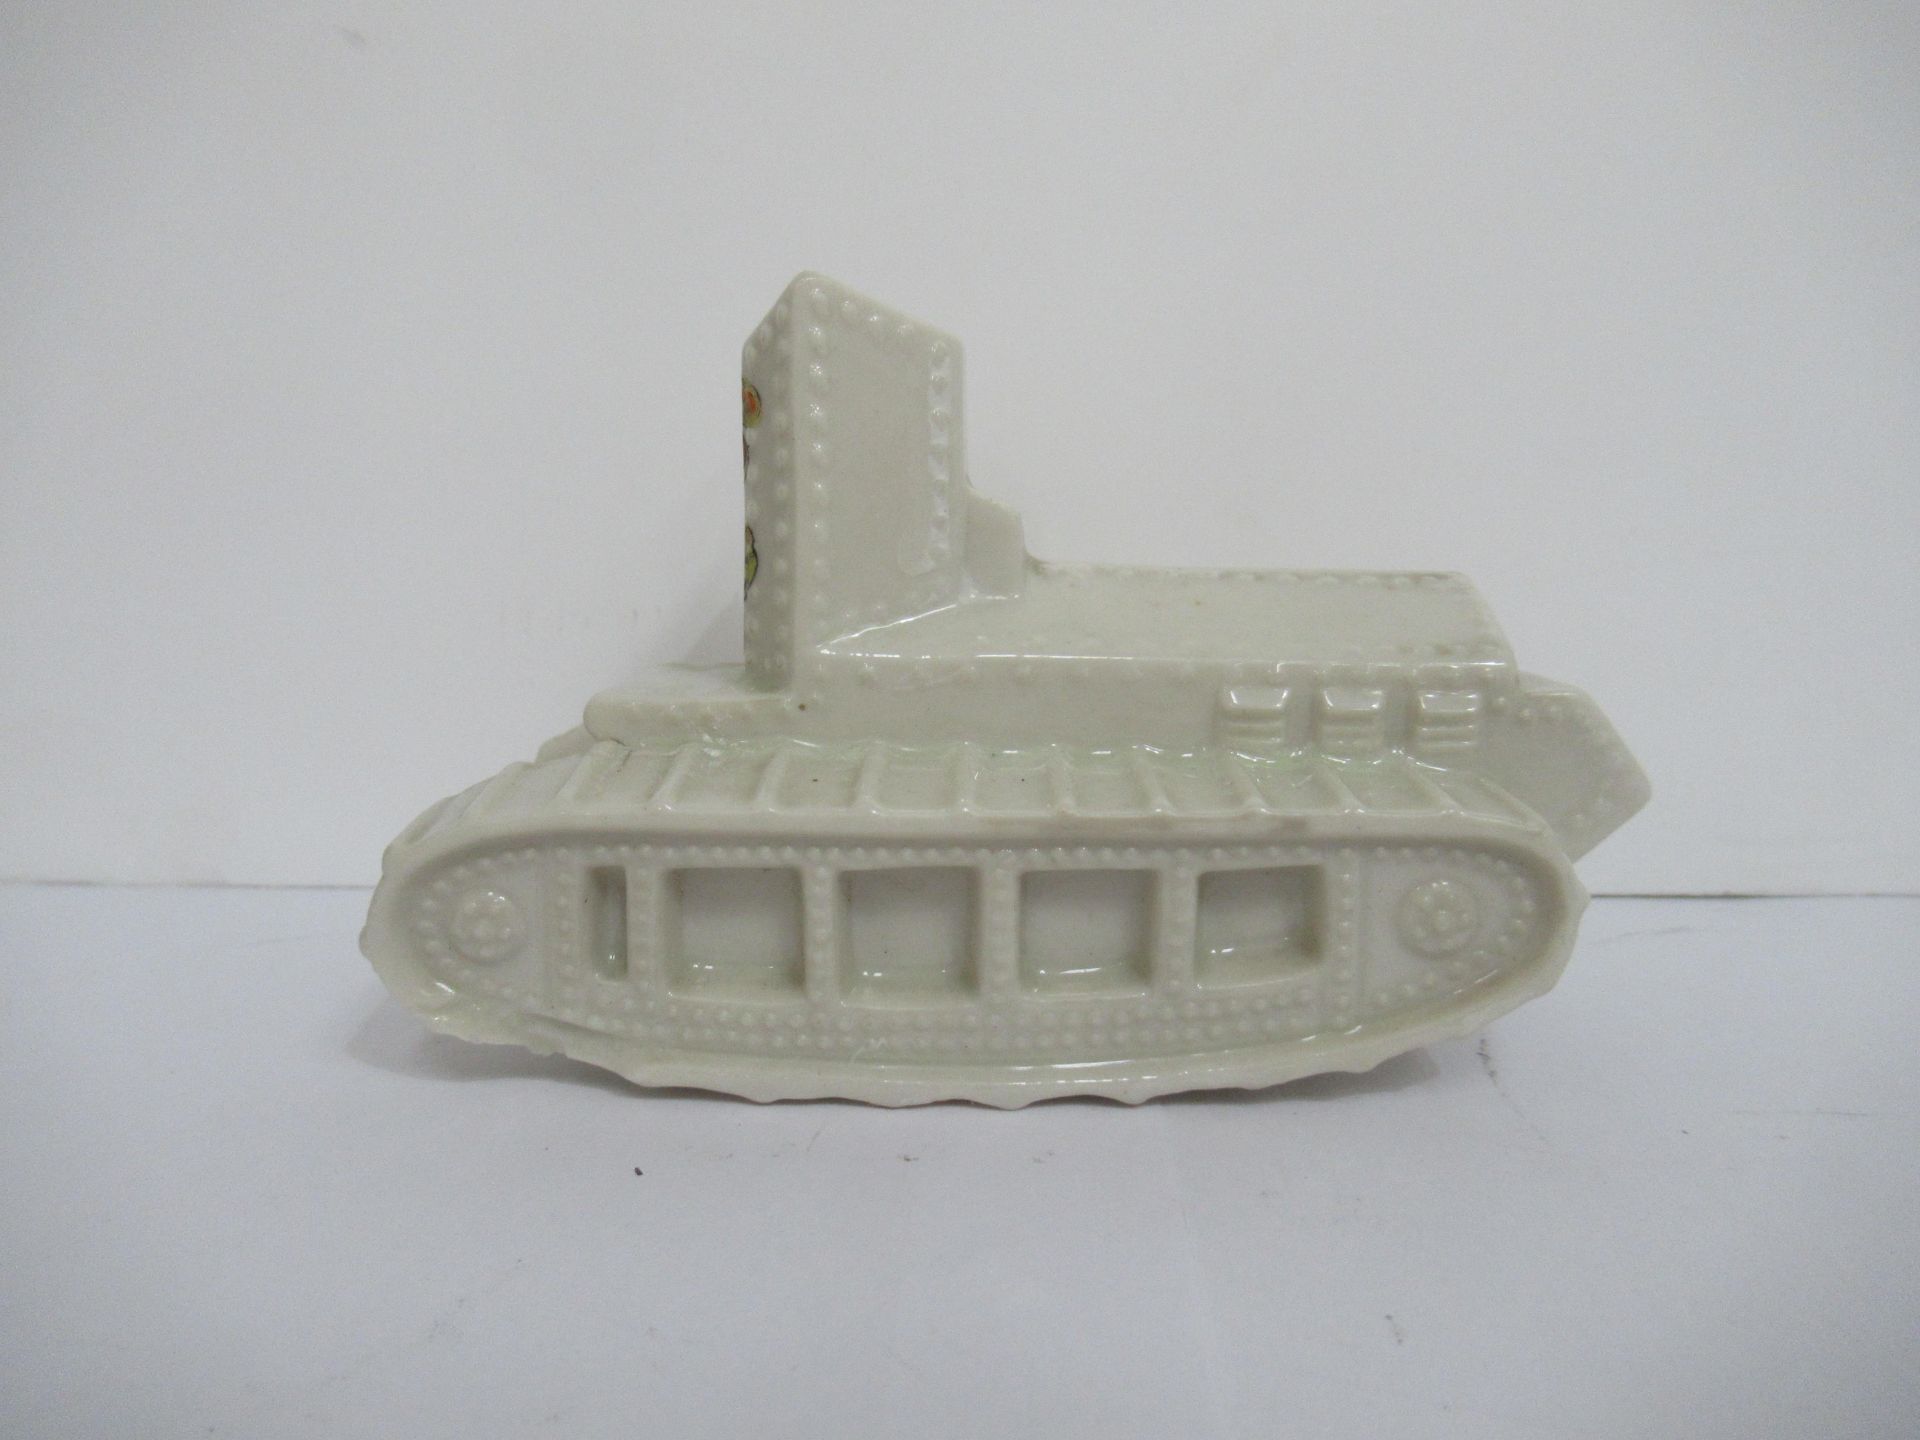 Crested China model of tracked vehicle with Cleethorpes coat of arms (115mm x 60mm) - Image 3 of 8